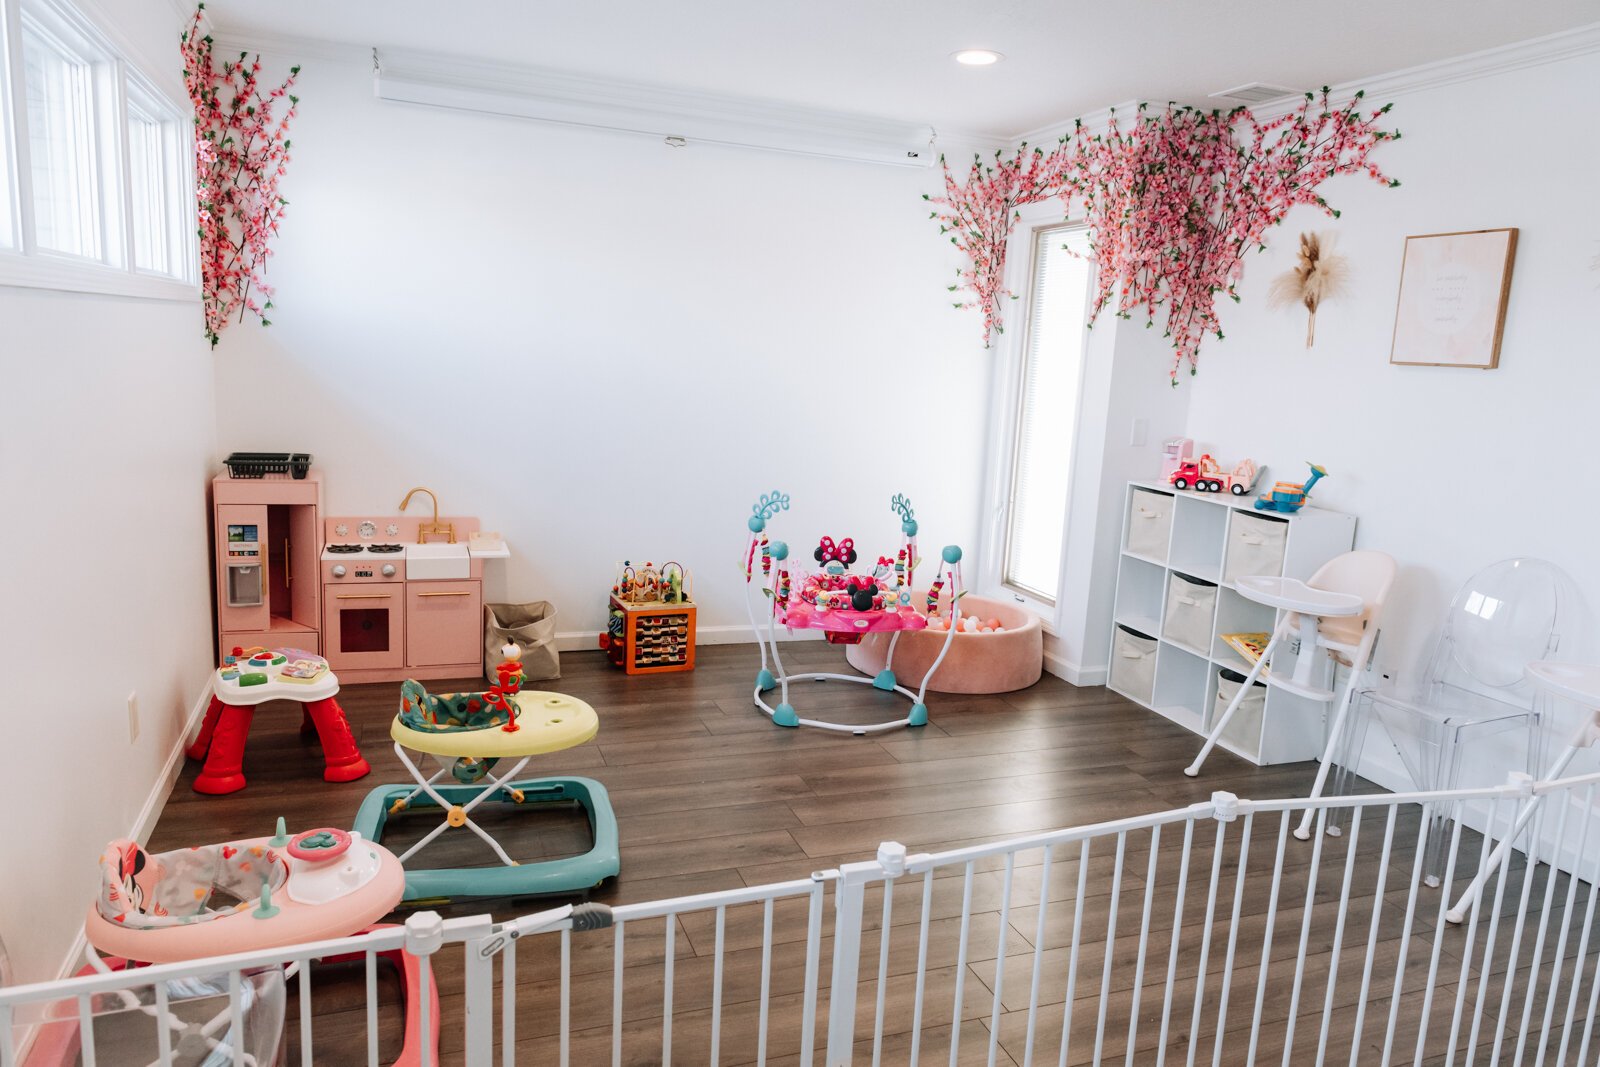 The children's playroom at Icing for Izaac.